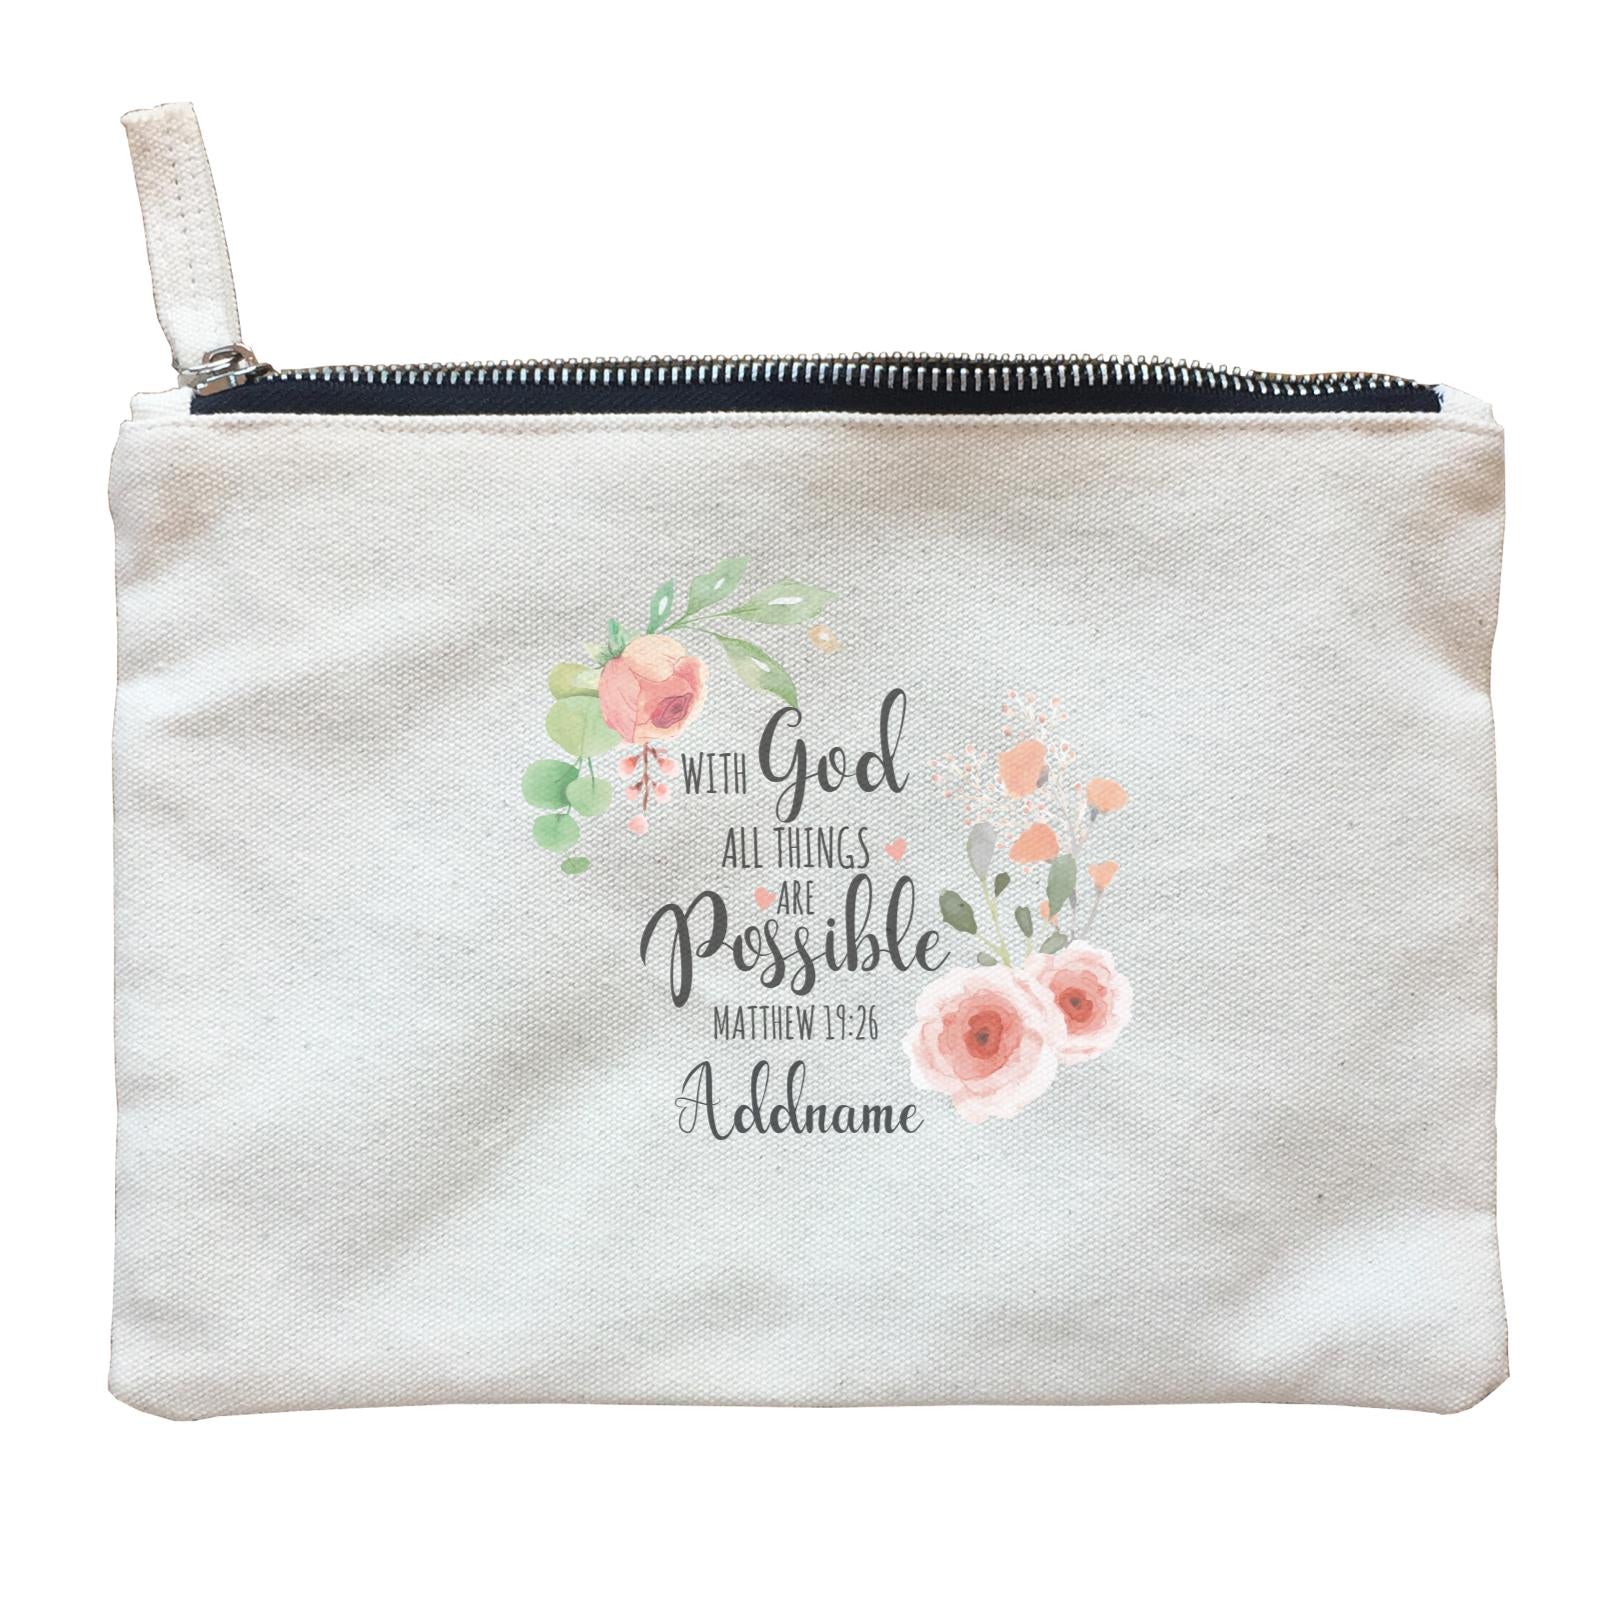 Gods Gift With God All Things Are Possible Matthew 19.26 Addname Zipper Pouch